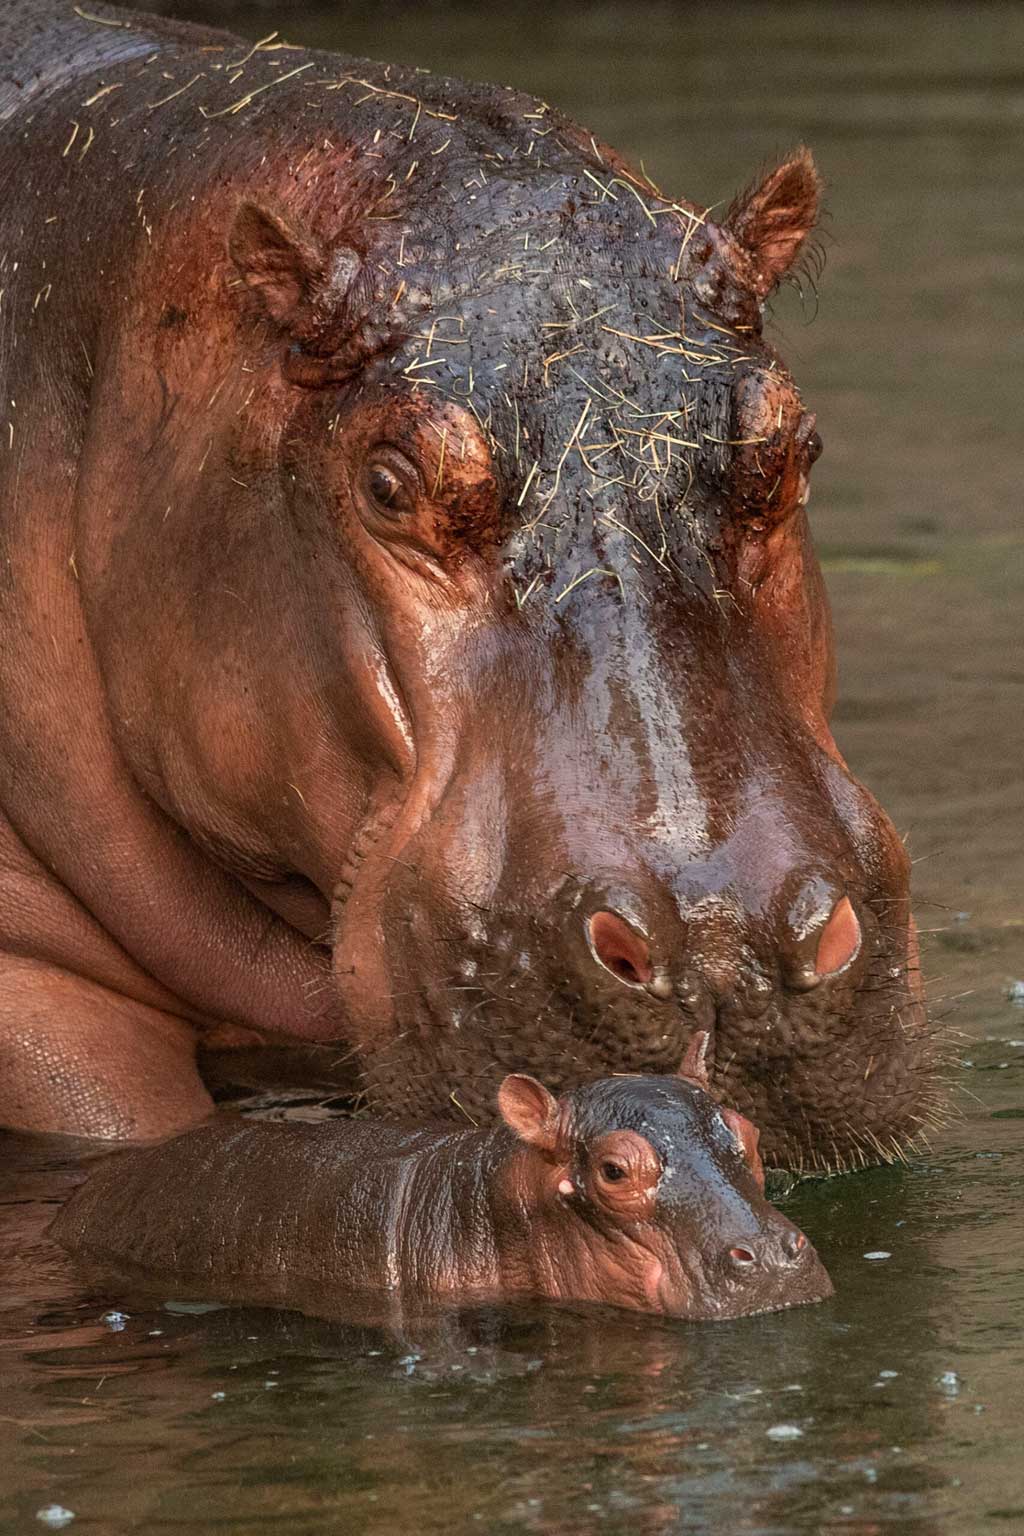 A Nile hippopotamus calf was born July 12, 2021, at Disney’s Animal Kingdom Theme Park at Walt Disney World Resort in Lake Buena Vista, Fla. The calf made a splashy debut in the Safi River on Kilimanjaro Safaris, under the watchful eye of Disney’s animal care team. So far, the healthy calf is nuzzling with mom, Tuma, and moving through the water like a pro. The team is giving Tuma and her newborn ample time to nurse and bond, so the calf’s gender and weight might not be known for some time; a newborn hippo can weigh between 60 and 110 pounds. This birth marks the 10th hippo currently in Disney care. (David Roark, photographer)